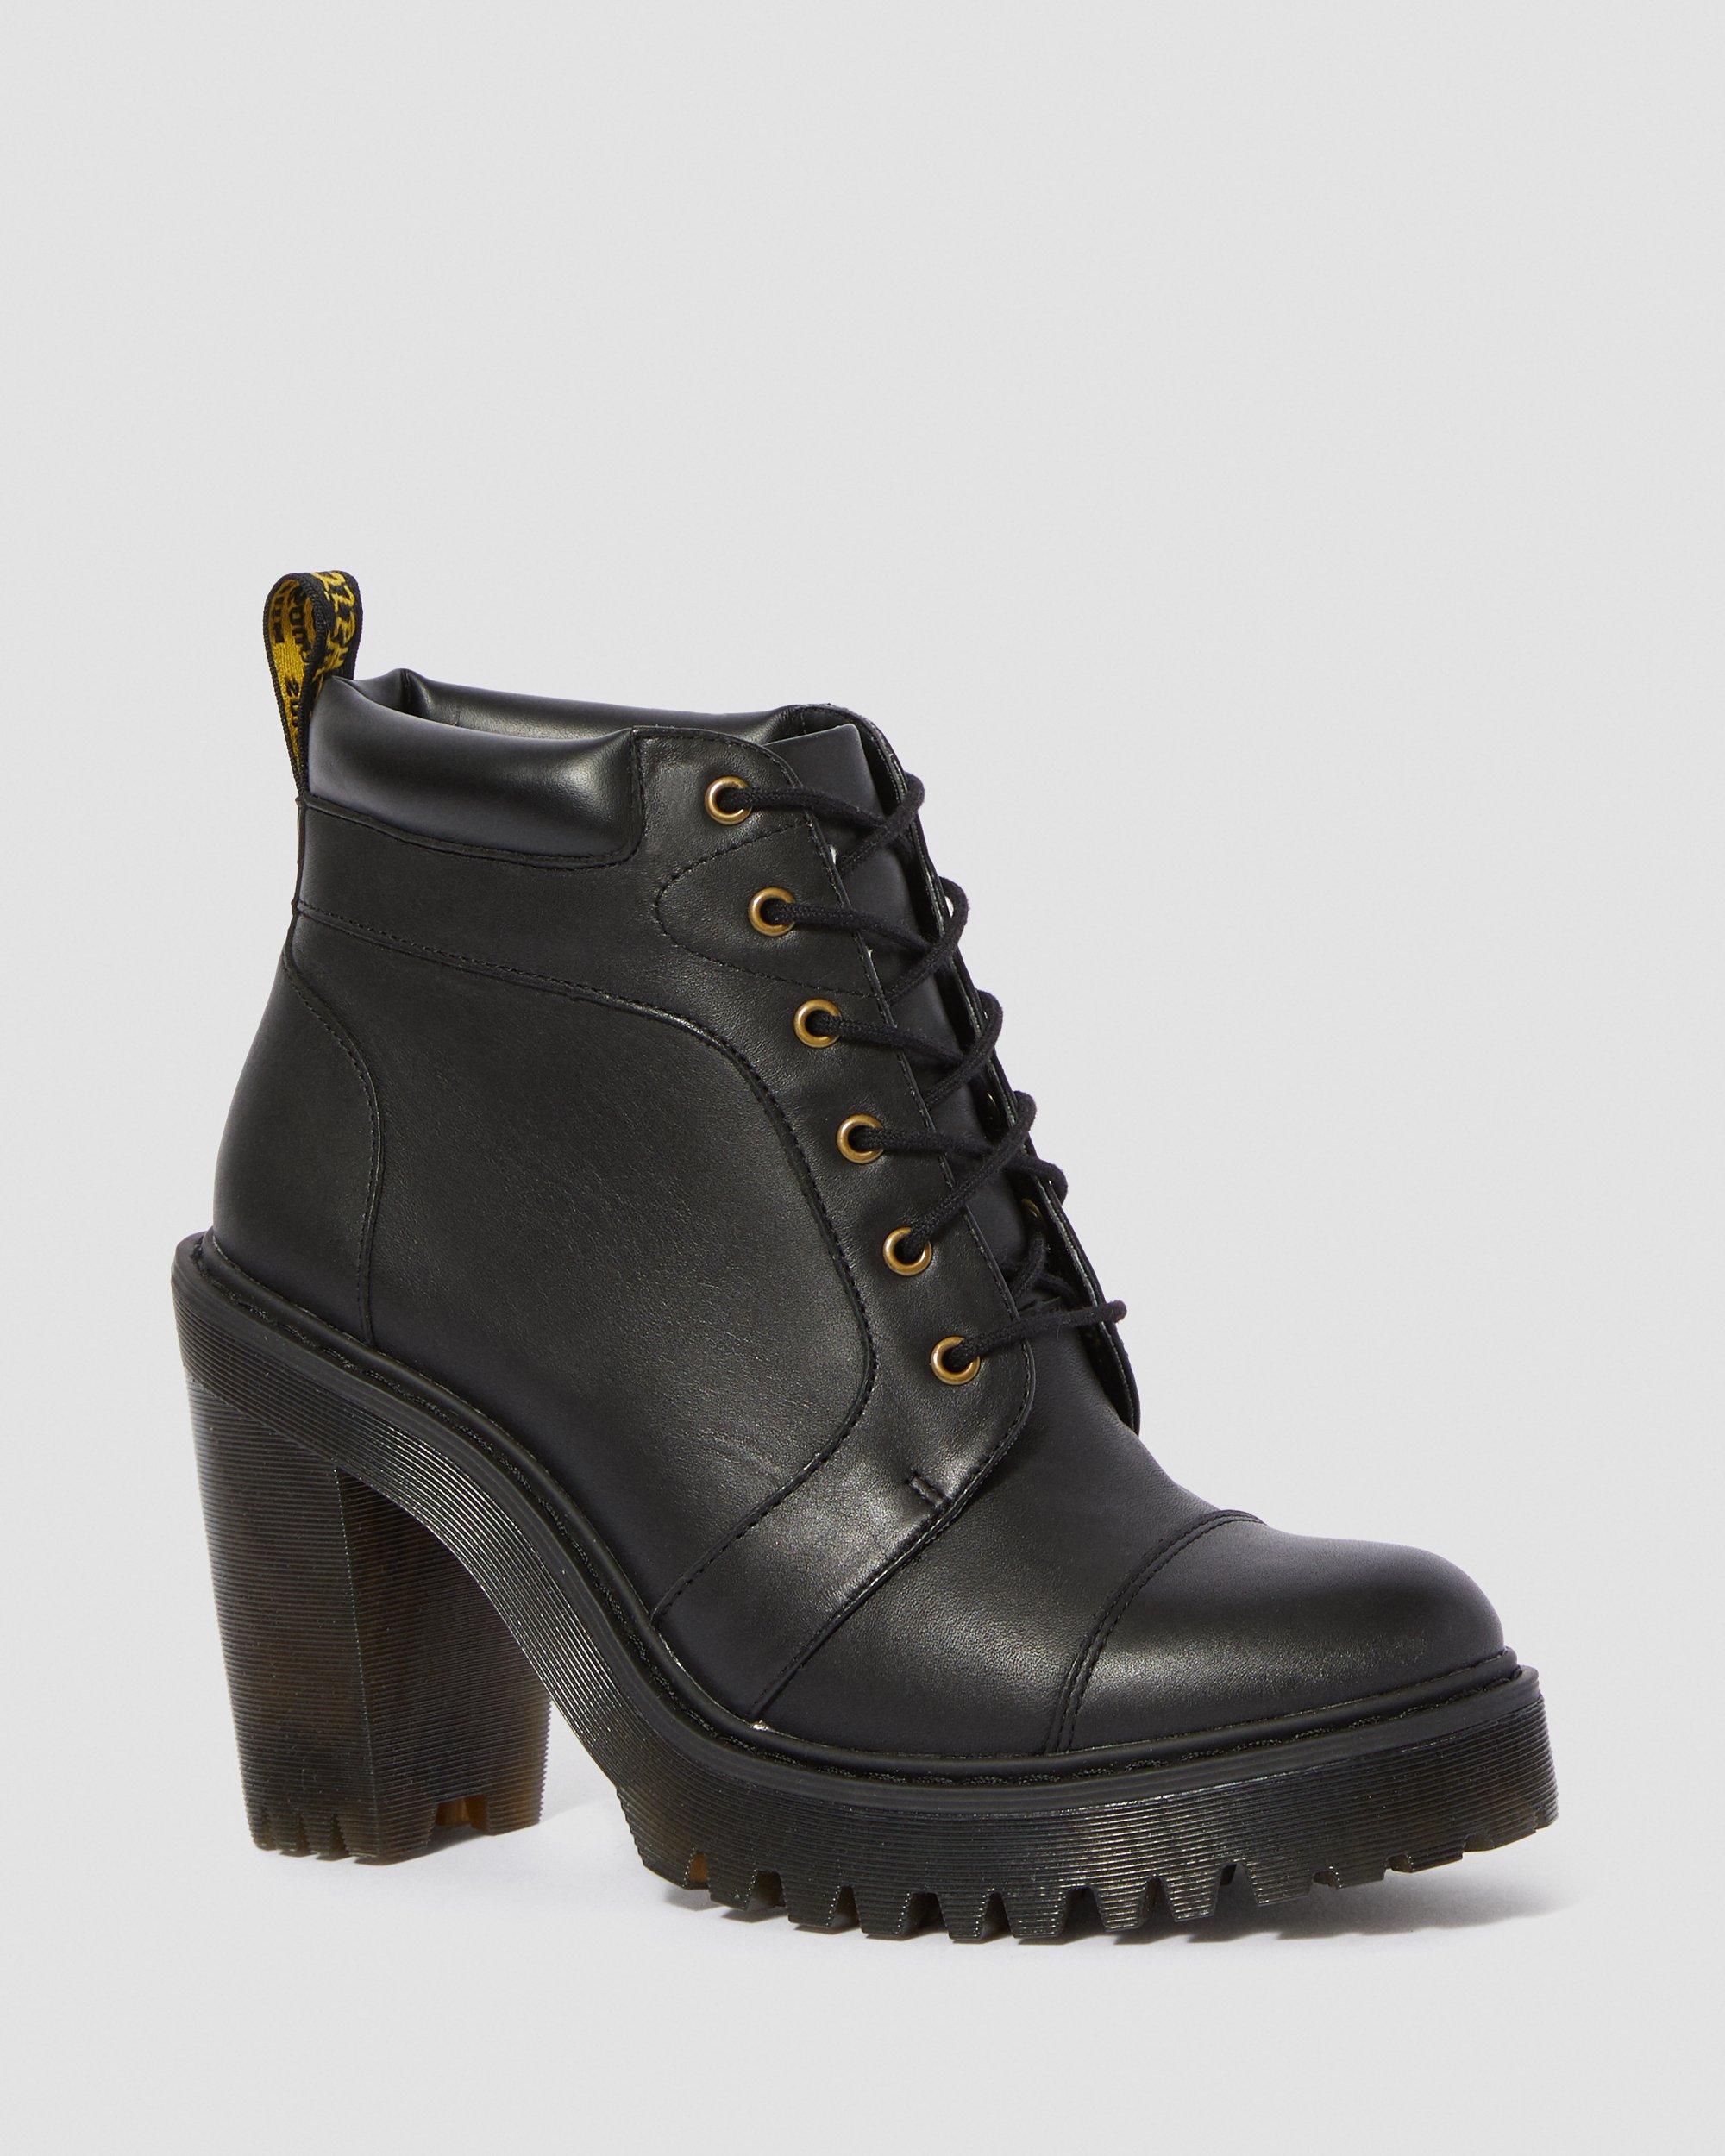 LEATHER HEELED ANKLE BOOTS | Dr. Martens